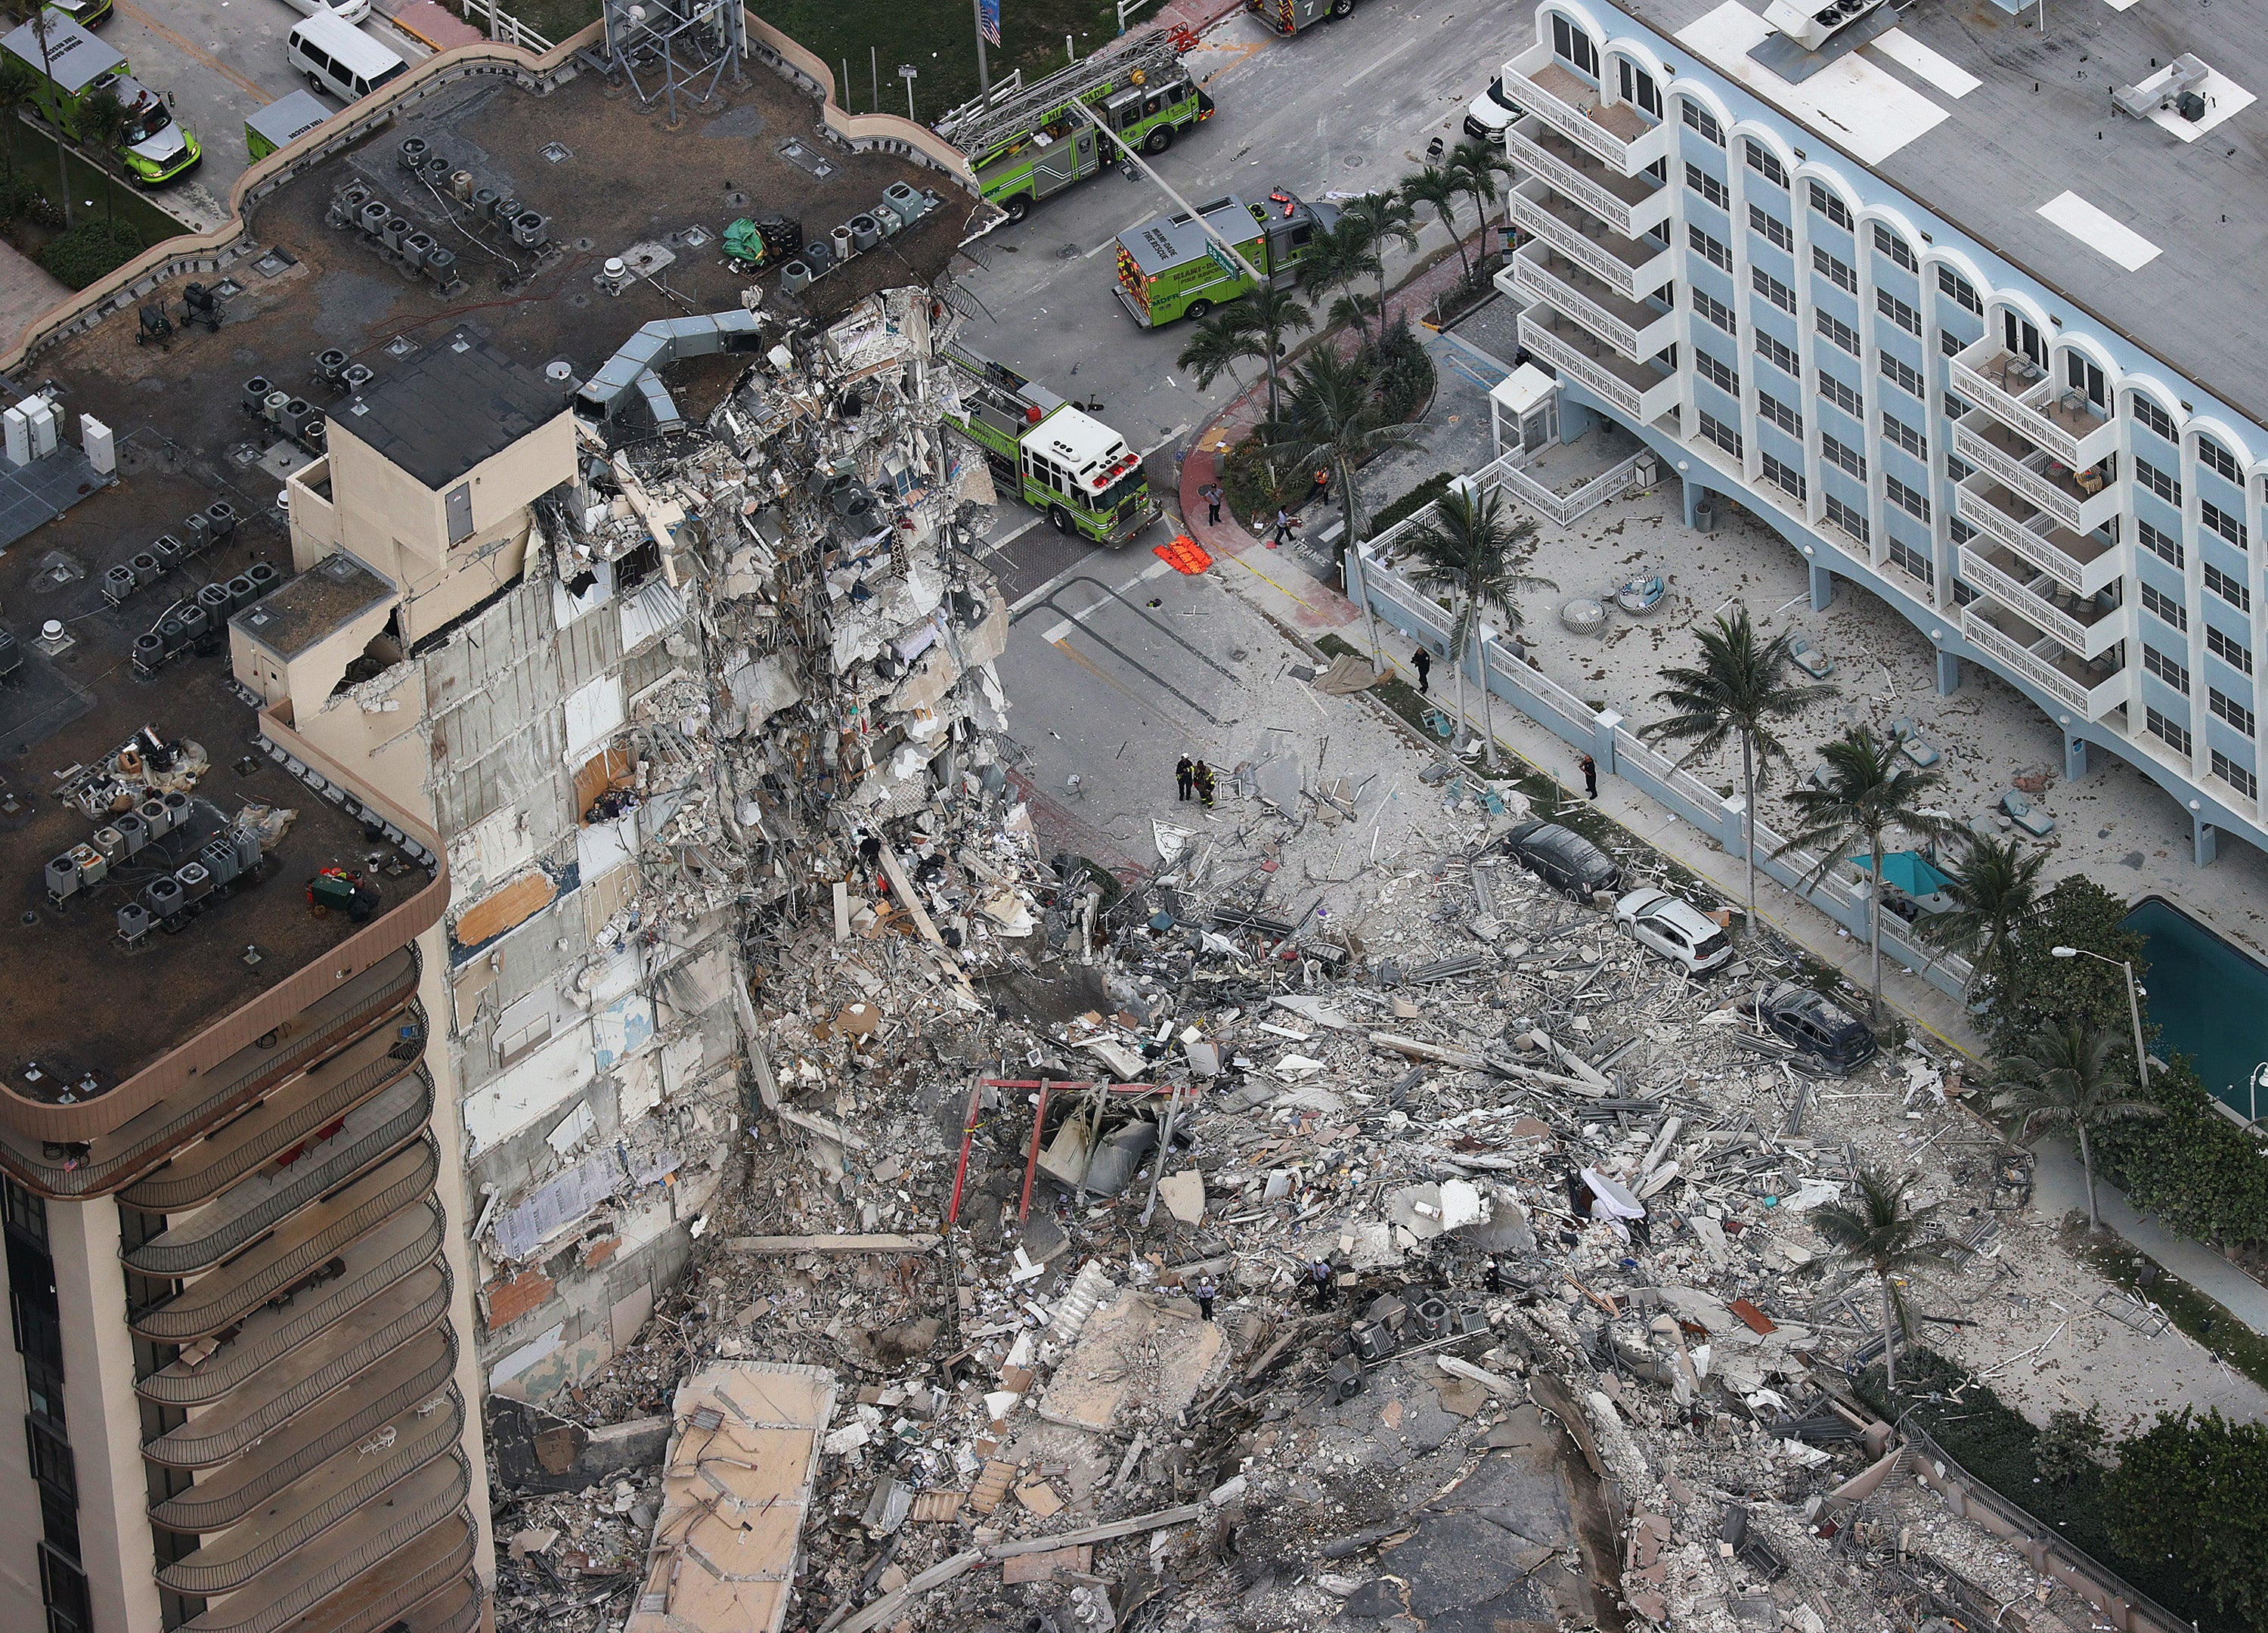 Part of the Champlain Towers collapsed on 24 June